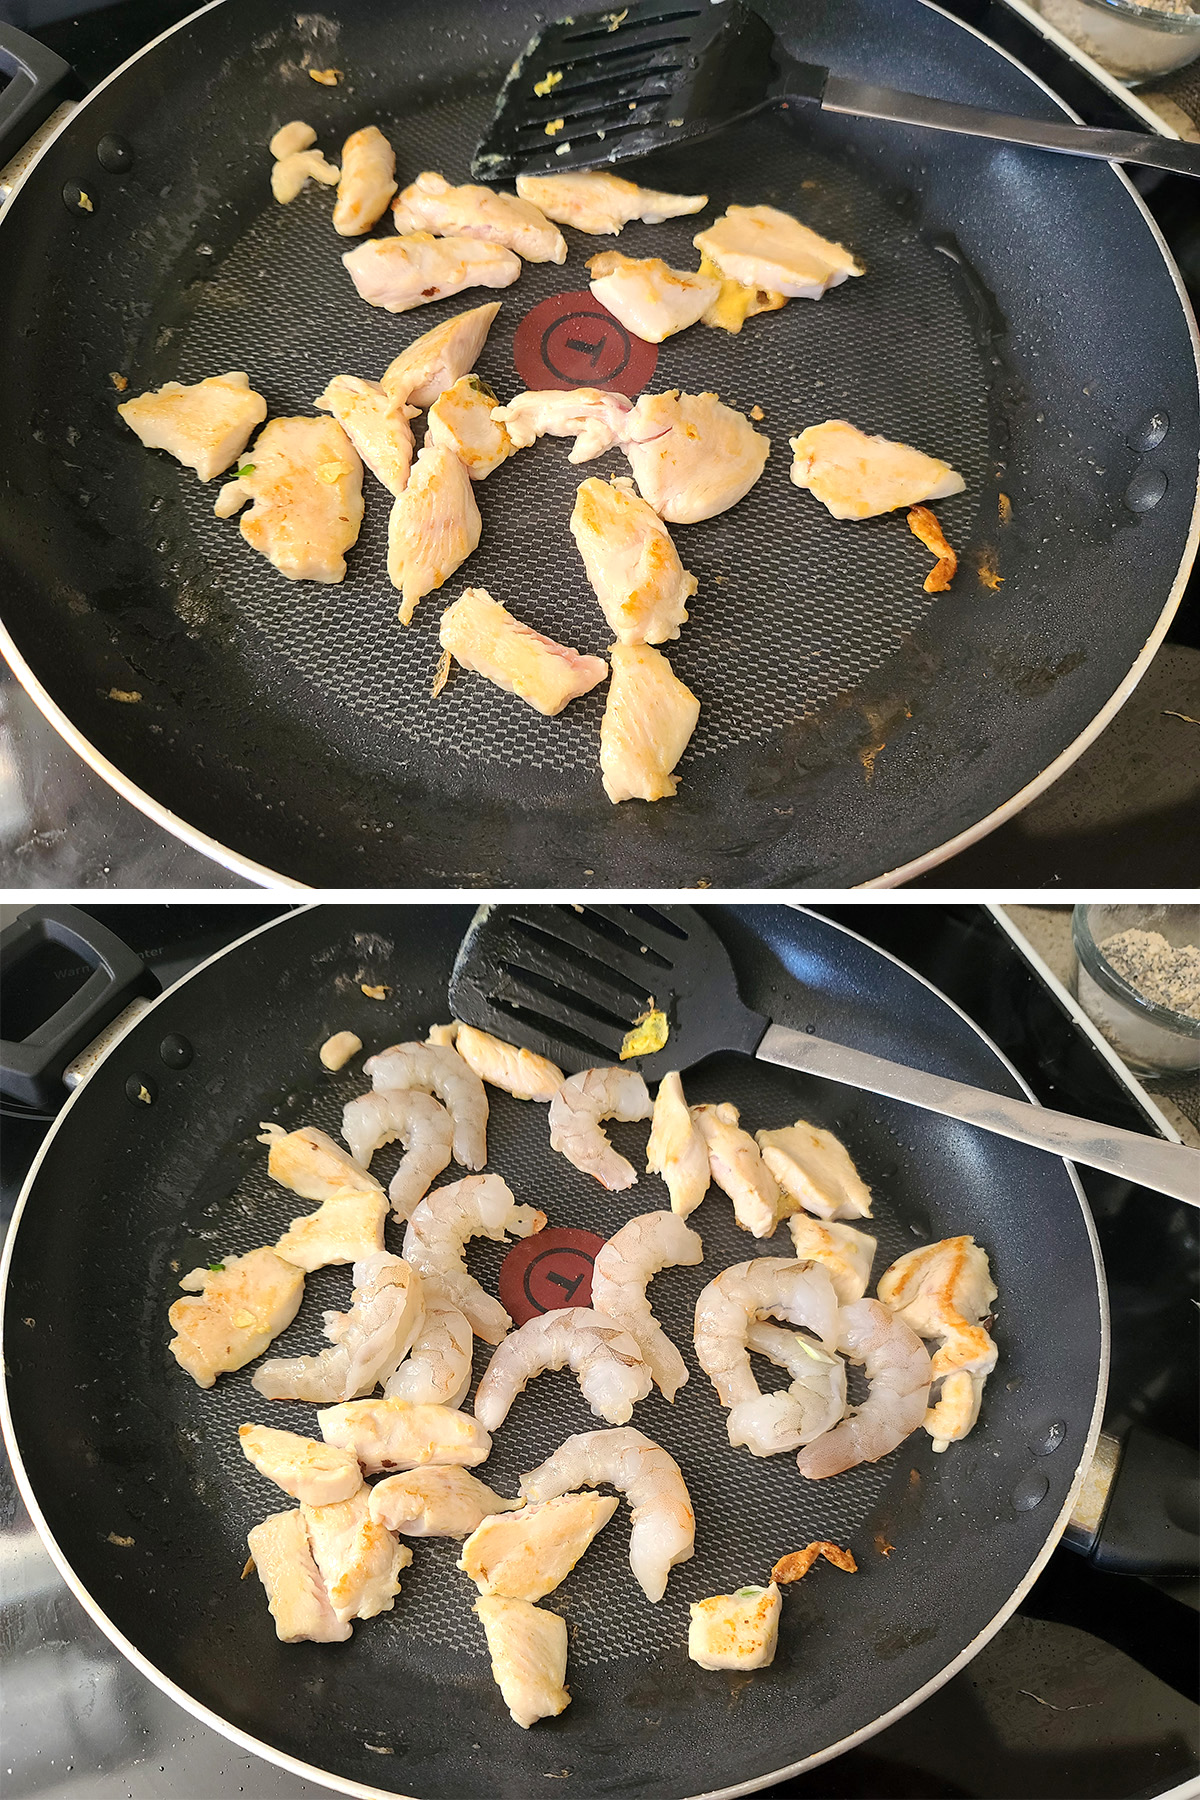 A two part compilation image showing chicken being cooked in a nonstick pan, and shrimp being added to the pan.